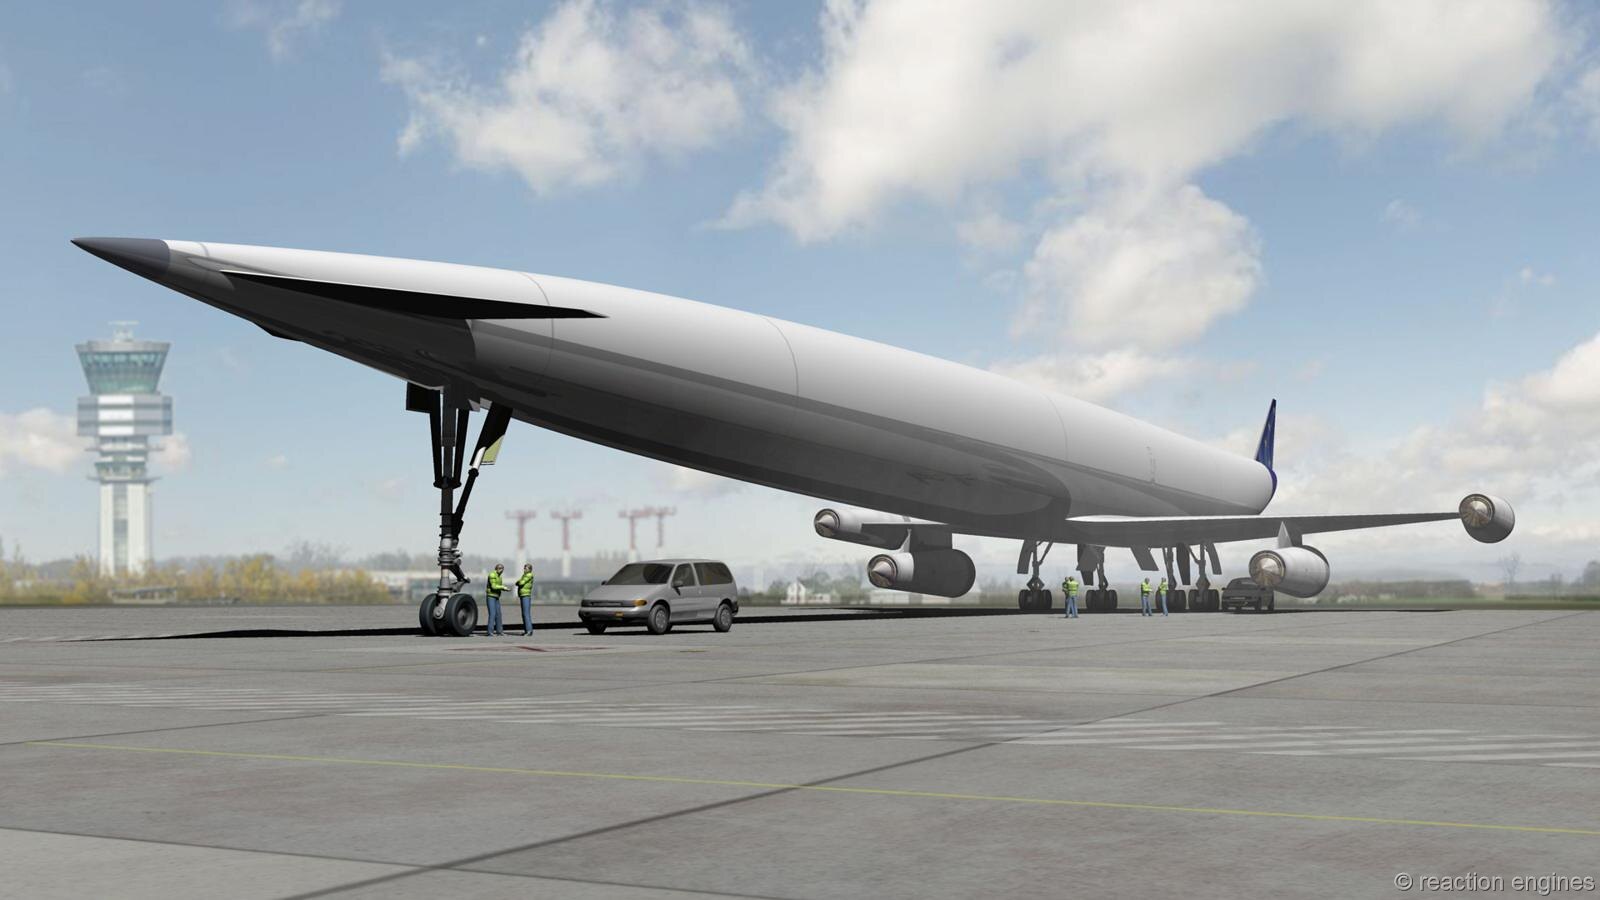 Hypersonic Aircraft on runway. Artist impression by Reaction Engines